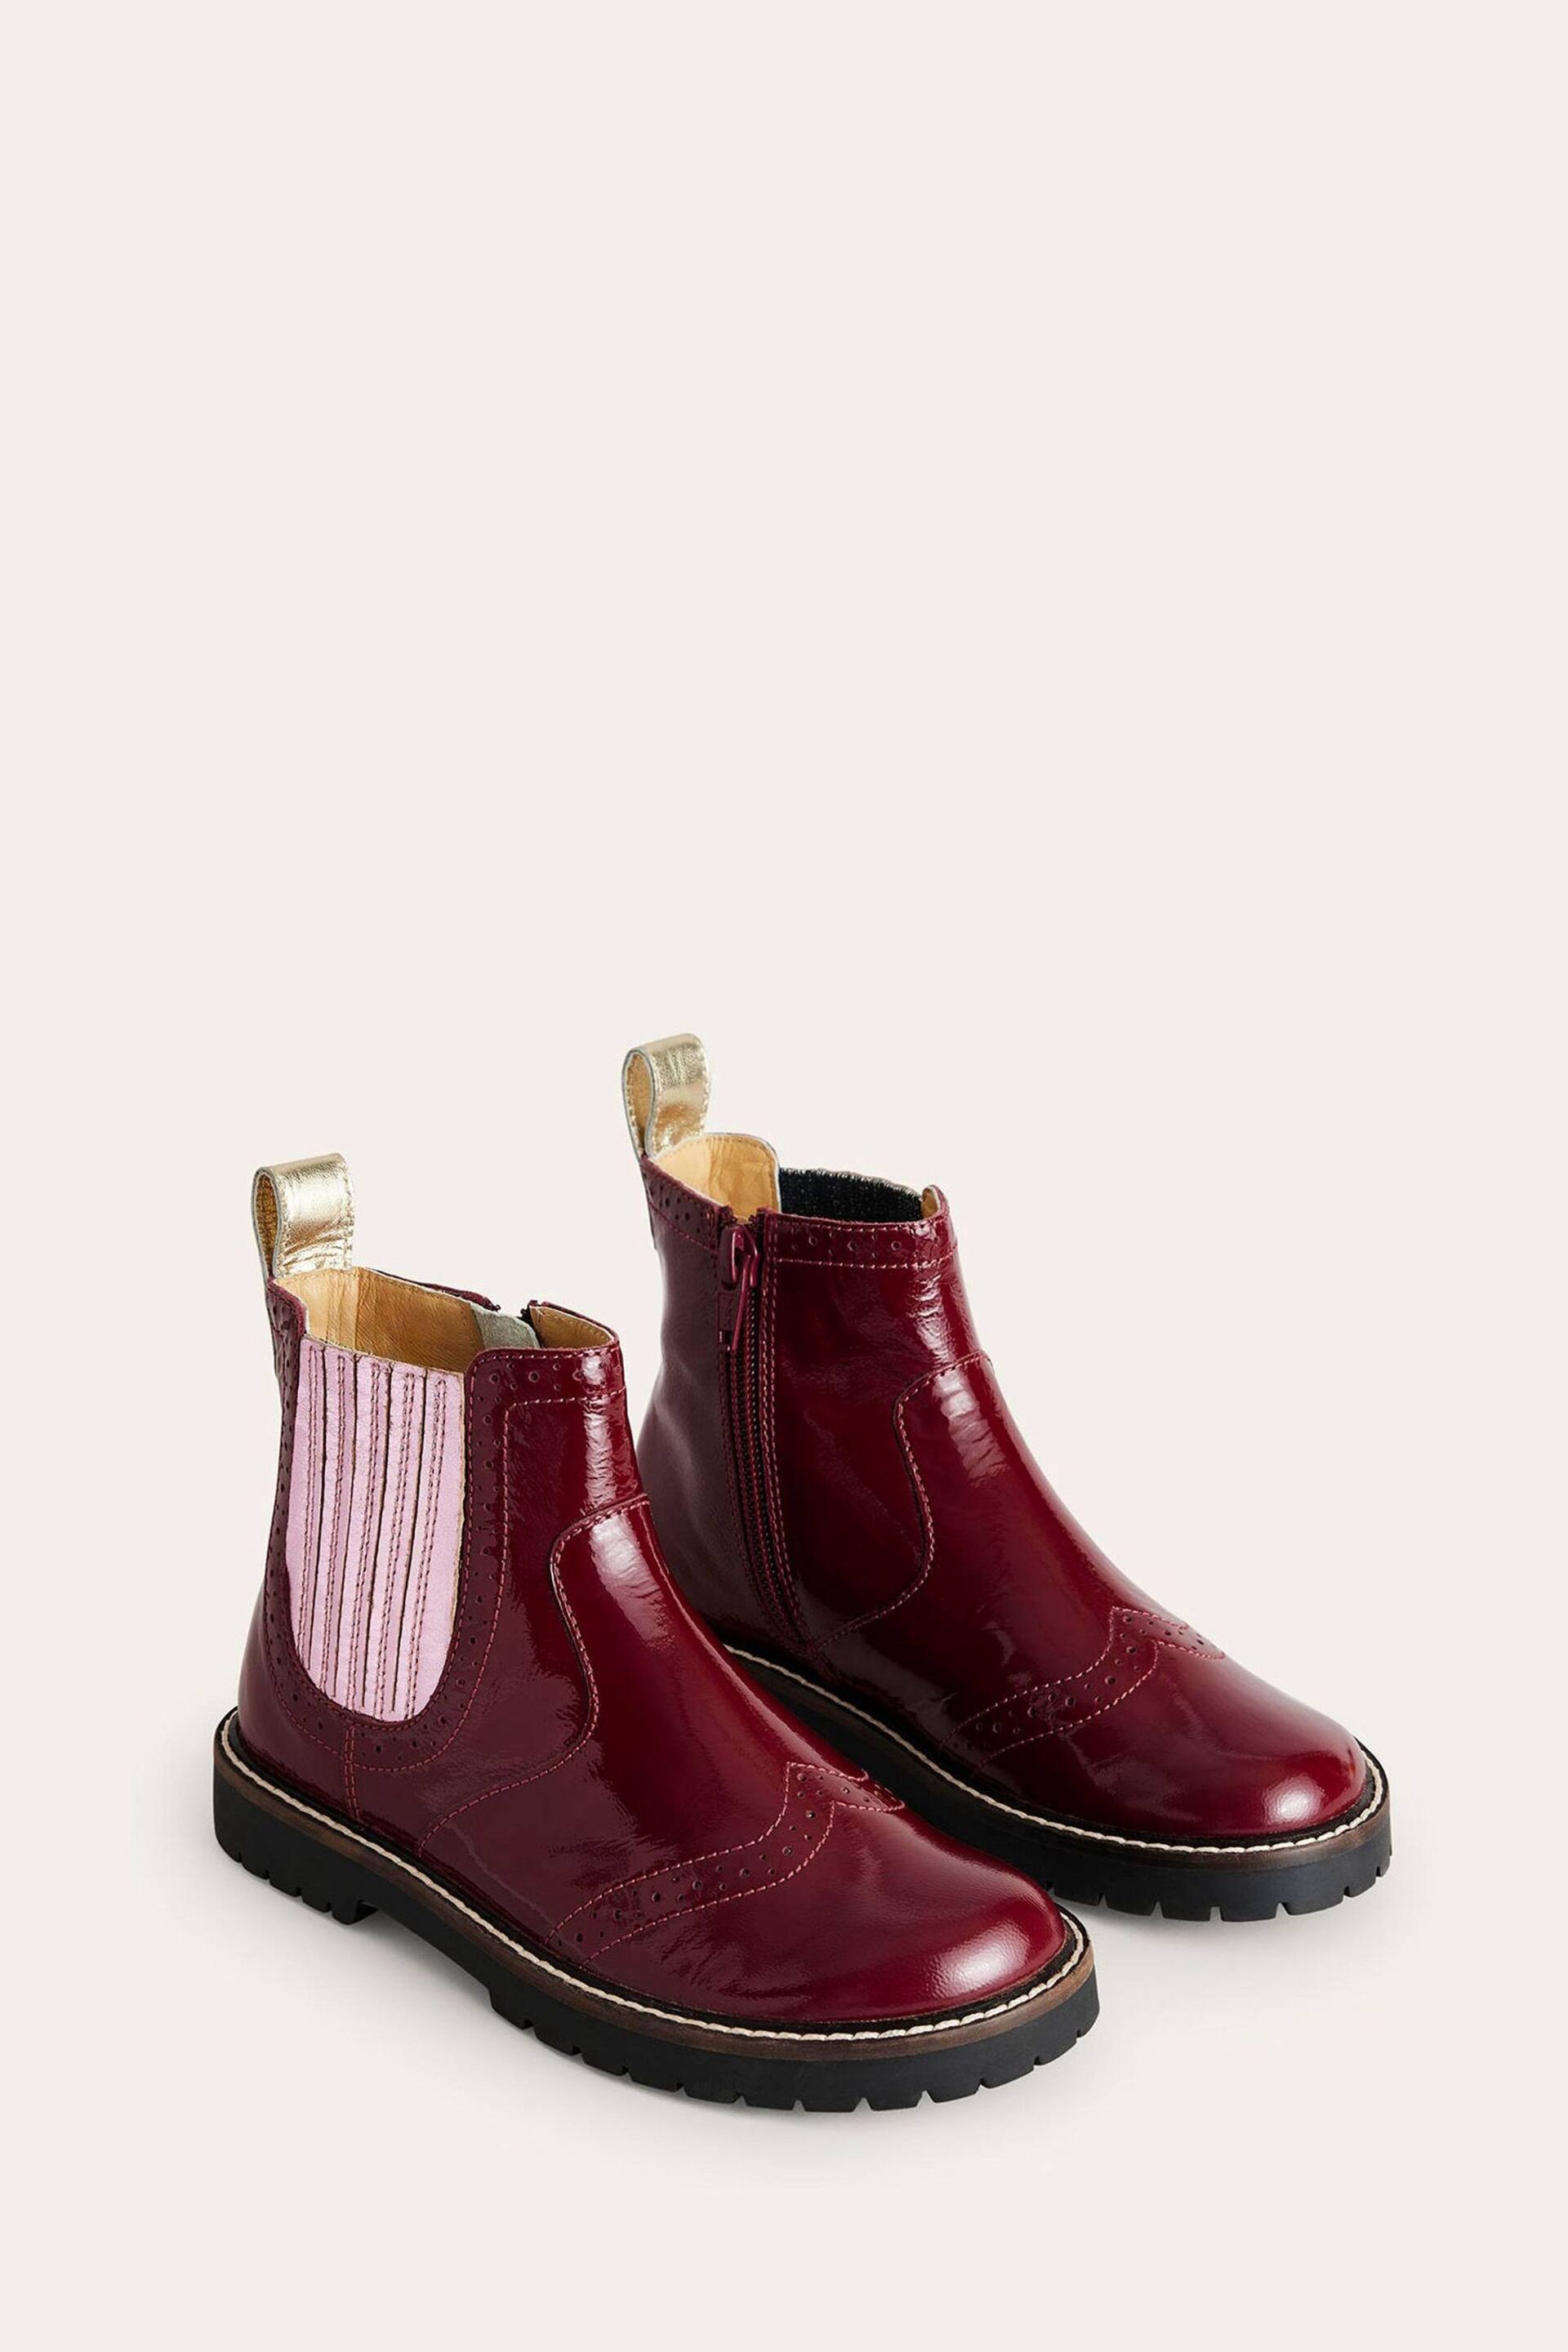 Boden Red Leather Chelsea Boots - Image 2 of 4